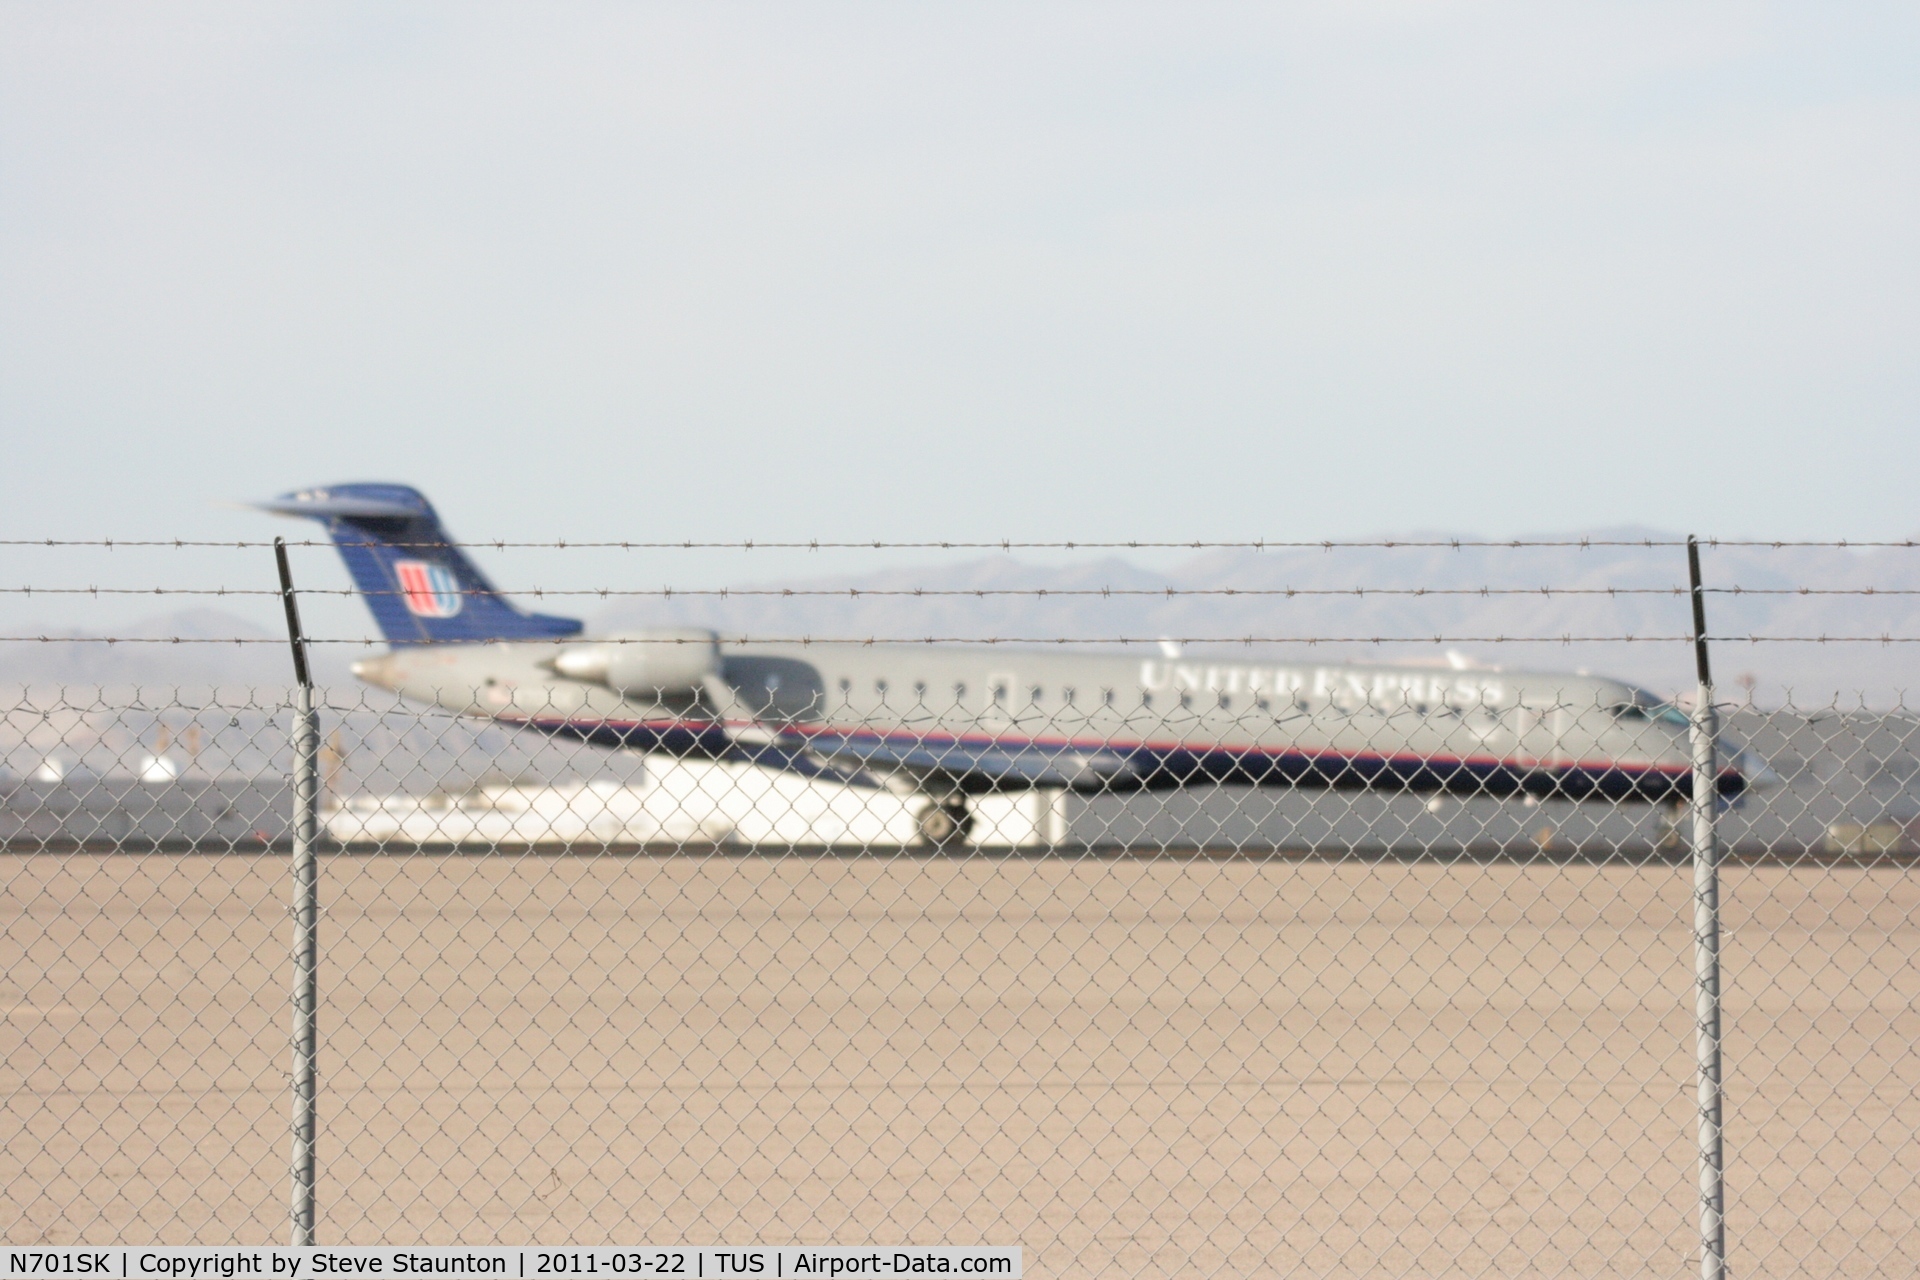 N701SK, 2004 Bombardier CRJ-700 (CL-600-2C10) Regional Jet C/N 10133, Taken at Tucson International Airport, in March 2011 whilst on an Aeroprint Aviation tour